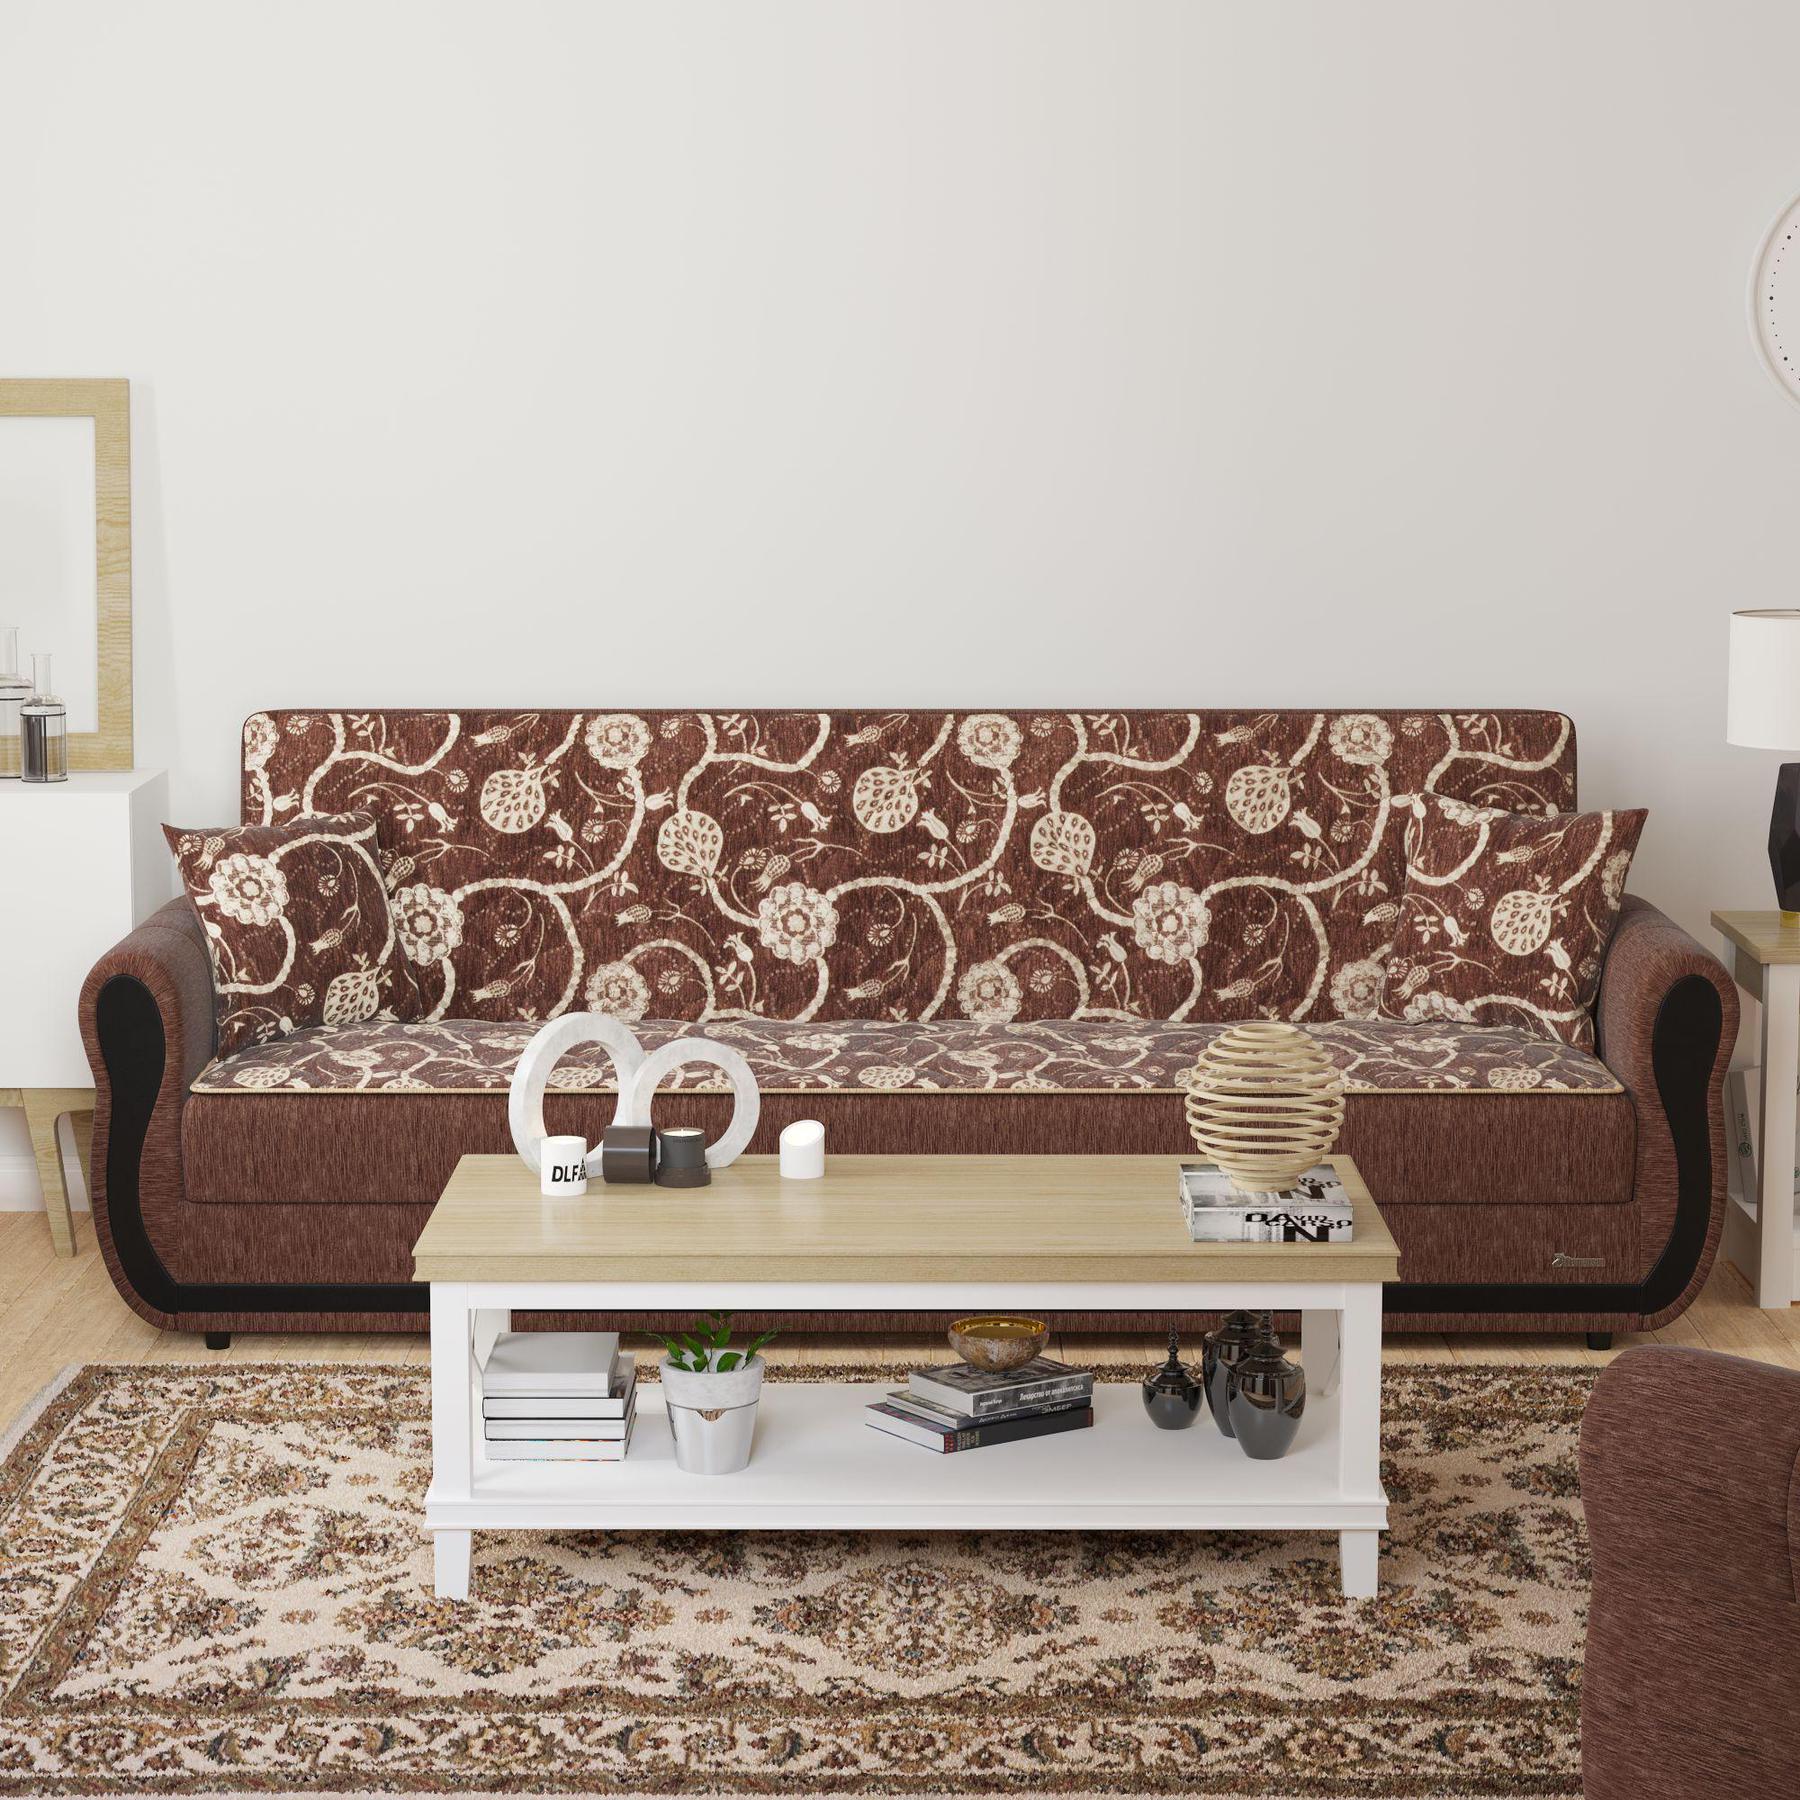 Modern design, Royal Brown , Chenille upholstered convertible sleeper Sofabed with underseat storage from Victoria Urban by Ottomanson in living room lifestyle setting by itself. This Sofabed measures 90 inches width by 28 inches depth by 38 inches height.